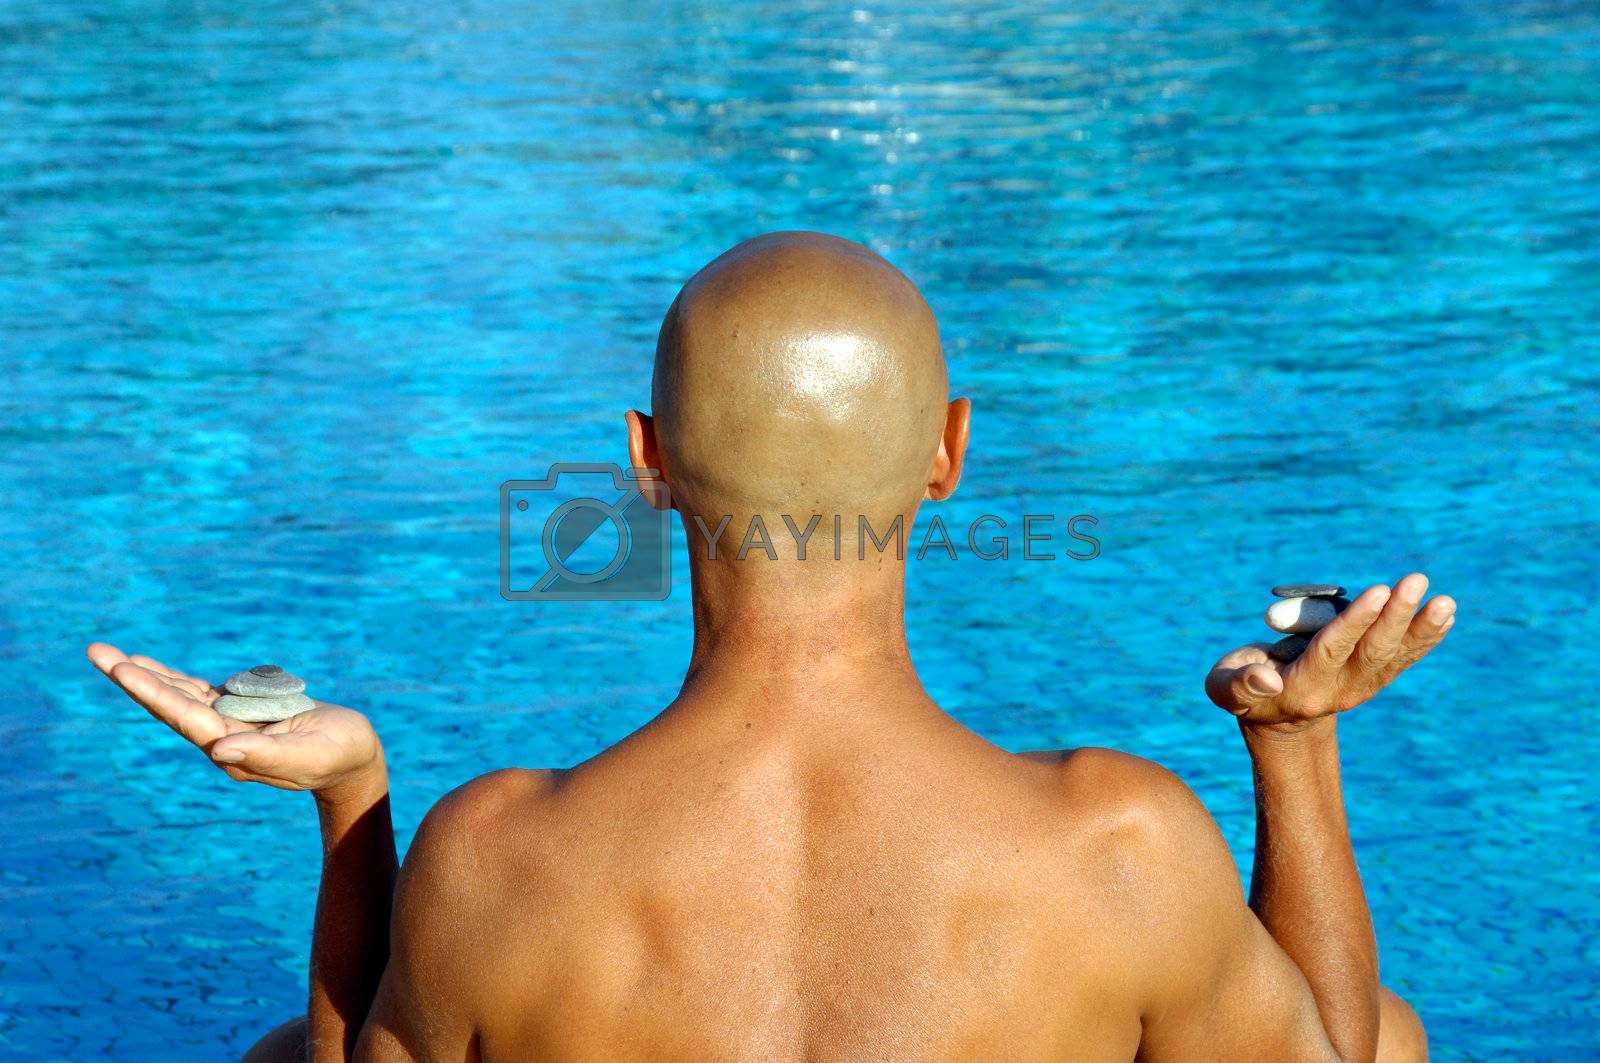 Royalty free image of Zen by swimnews